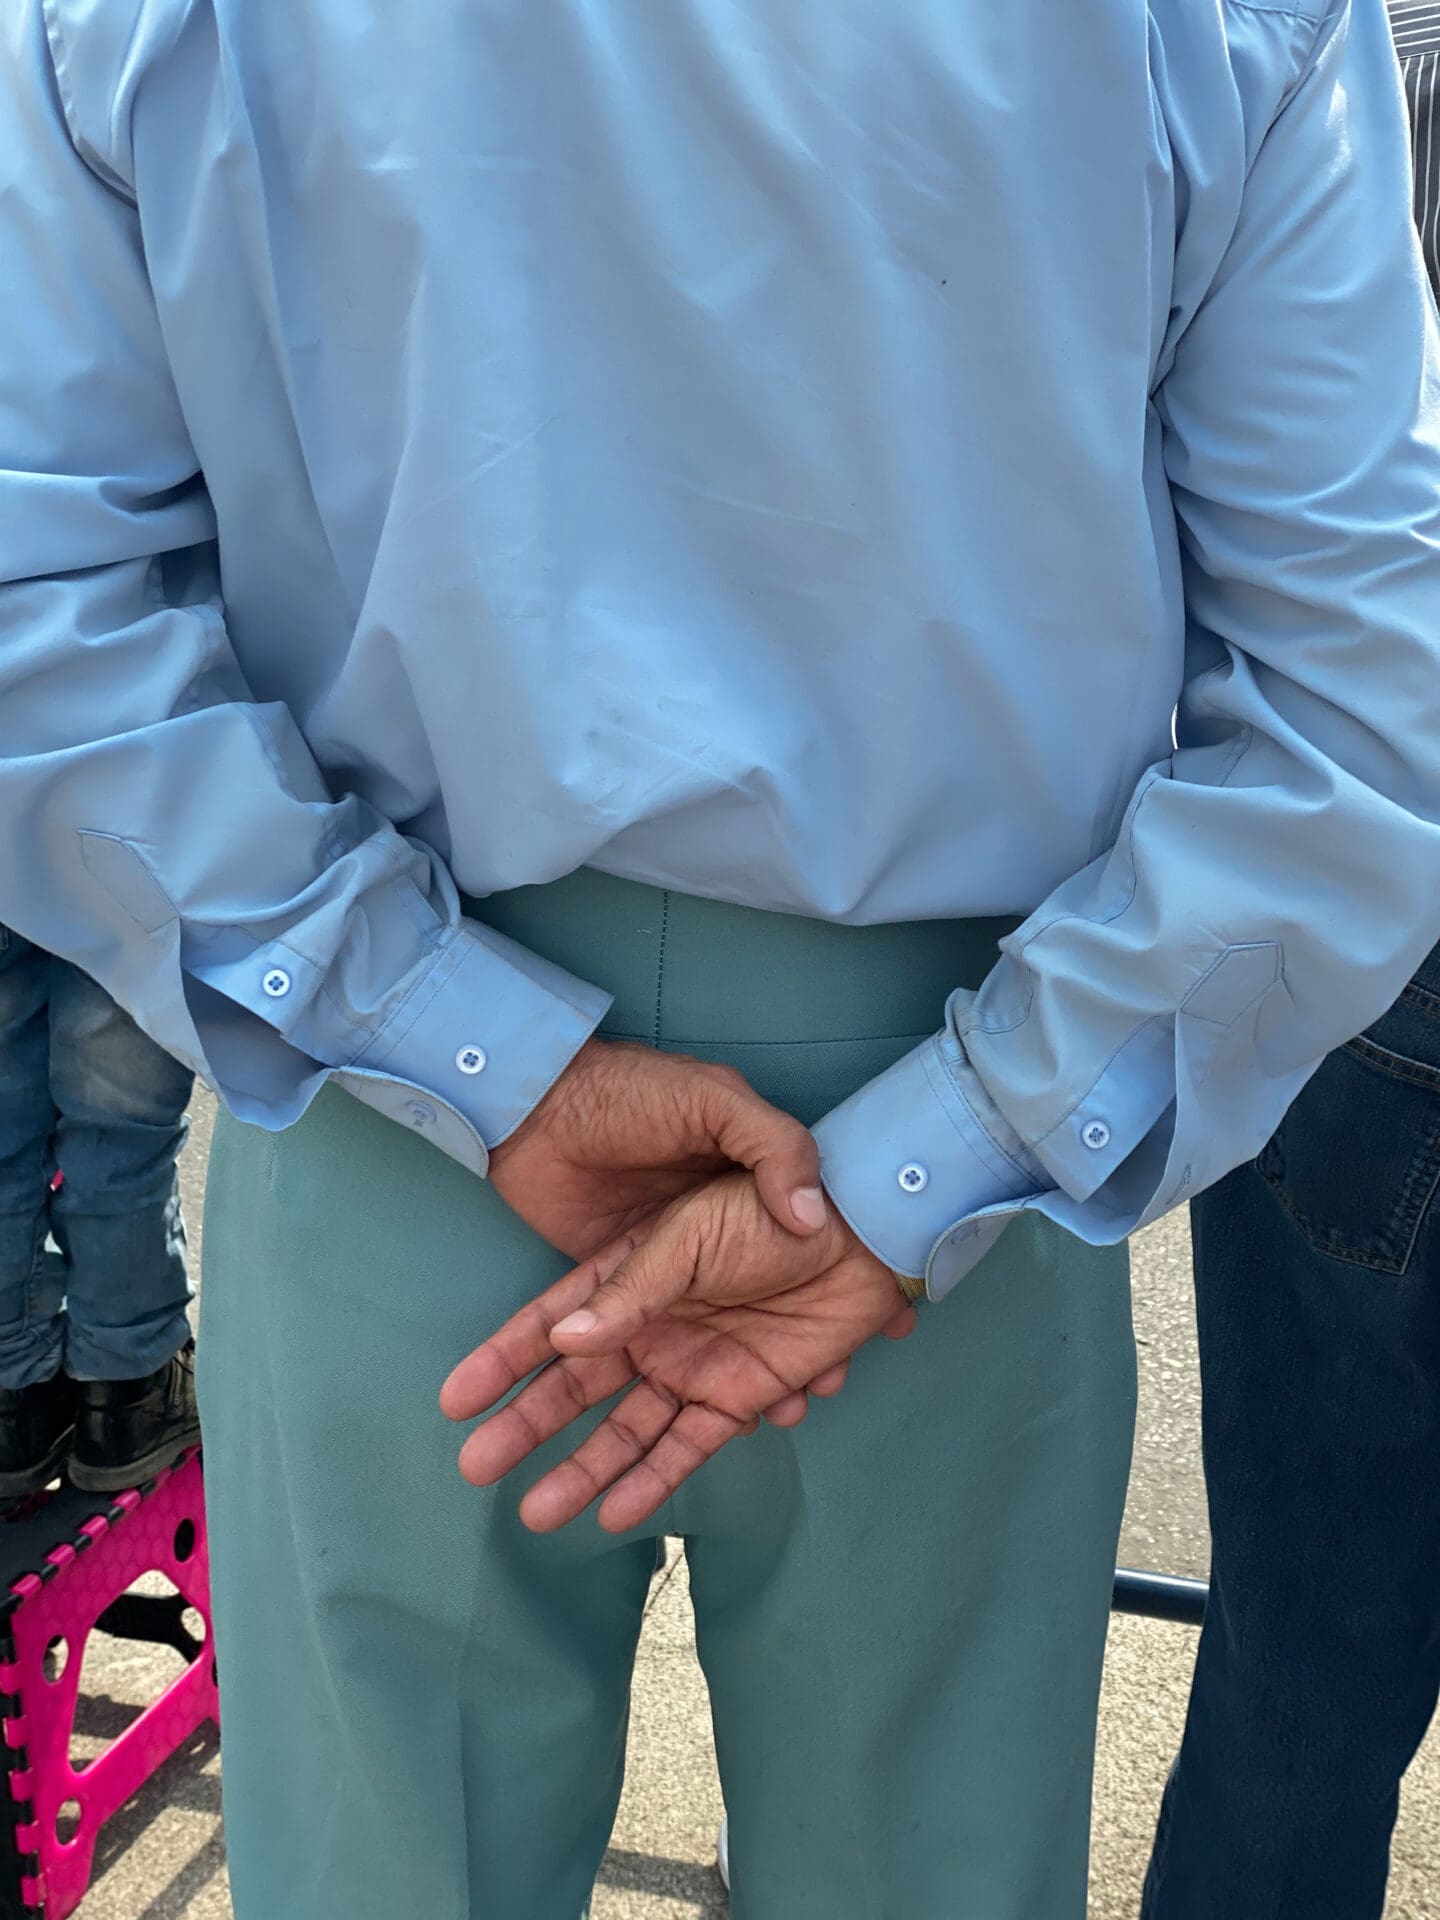 Photographer Manuel Zúñiga on Mexico City | A man wearing a pale-blue shirt and teal trousers clasps his hands behind his back and faces away from the camera